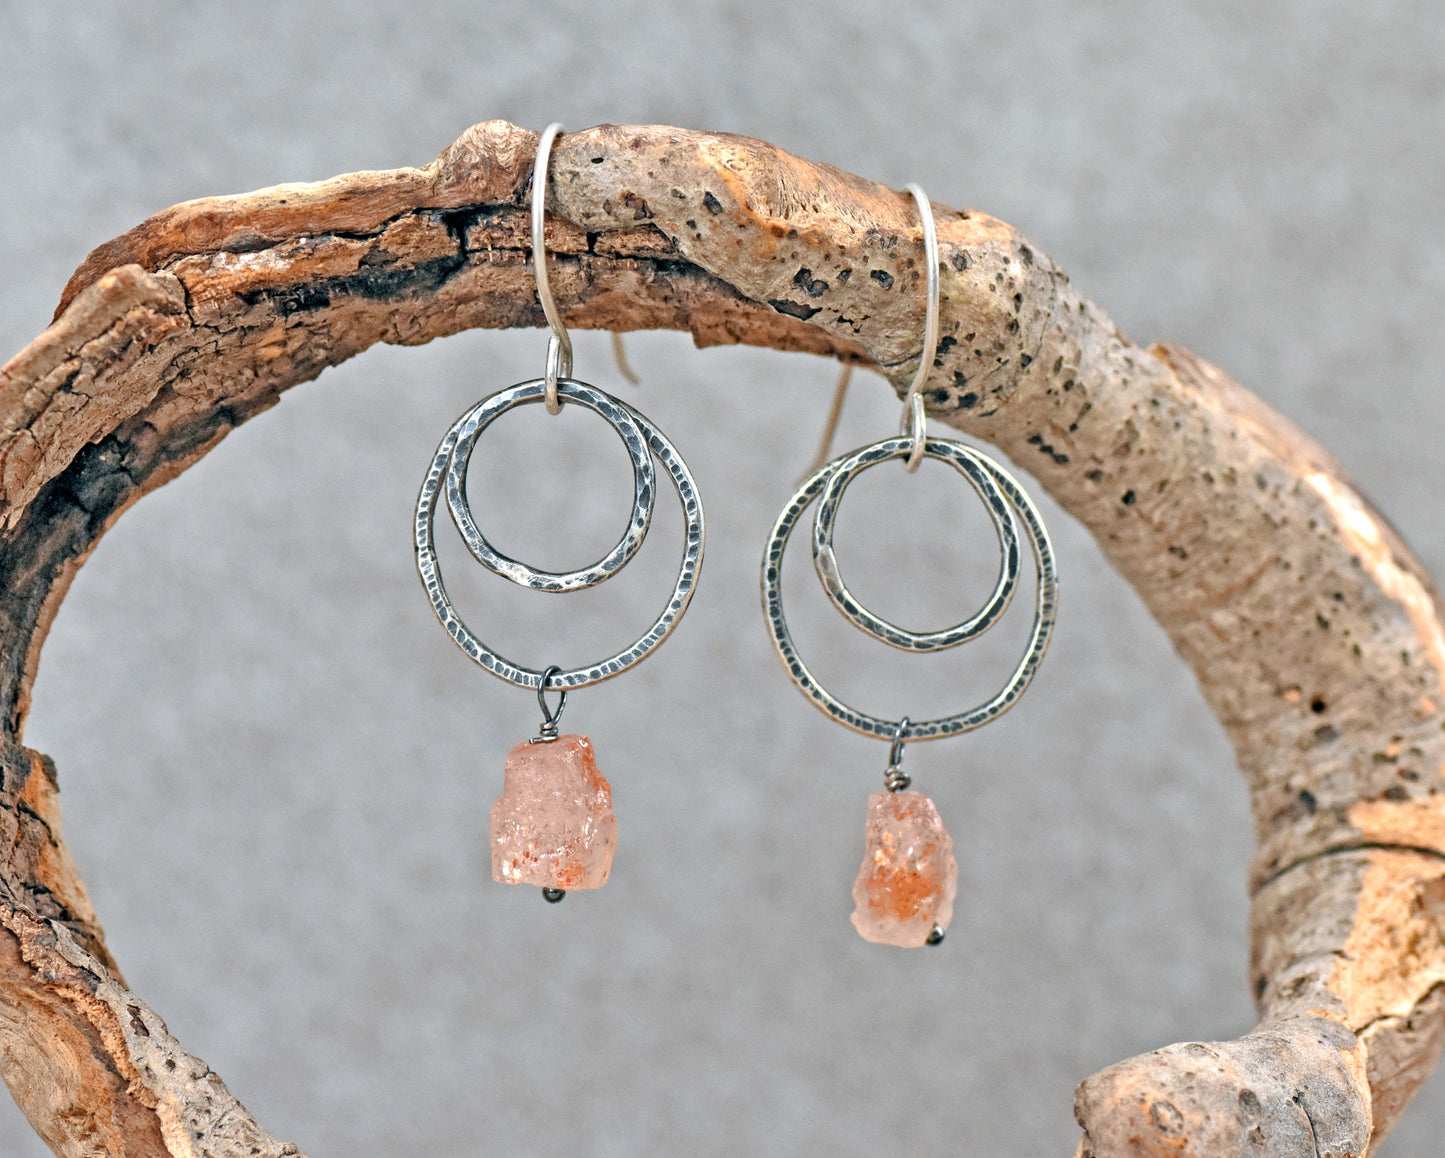 Raw Sunstone Earrings Sterling Silver, Natural Rough Orange Stone Gemstone Dangles, Unique Artisan Circle Jewelry